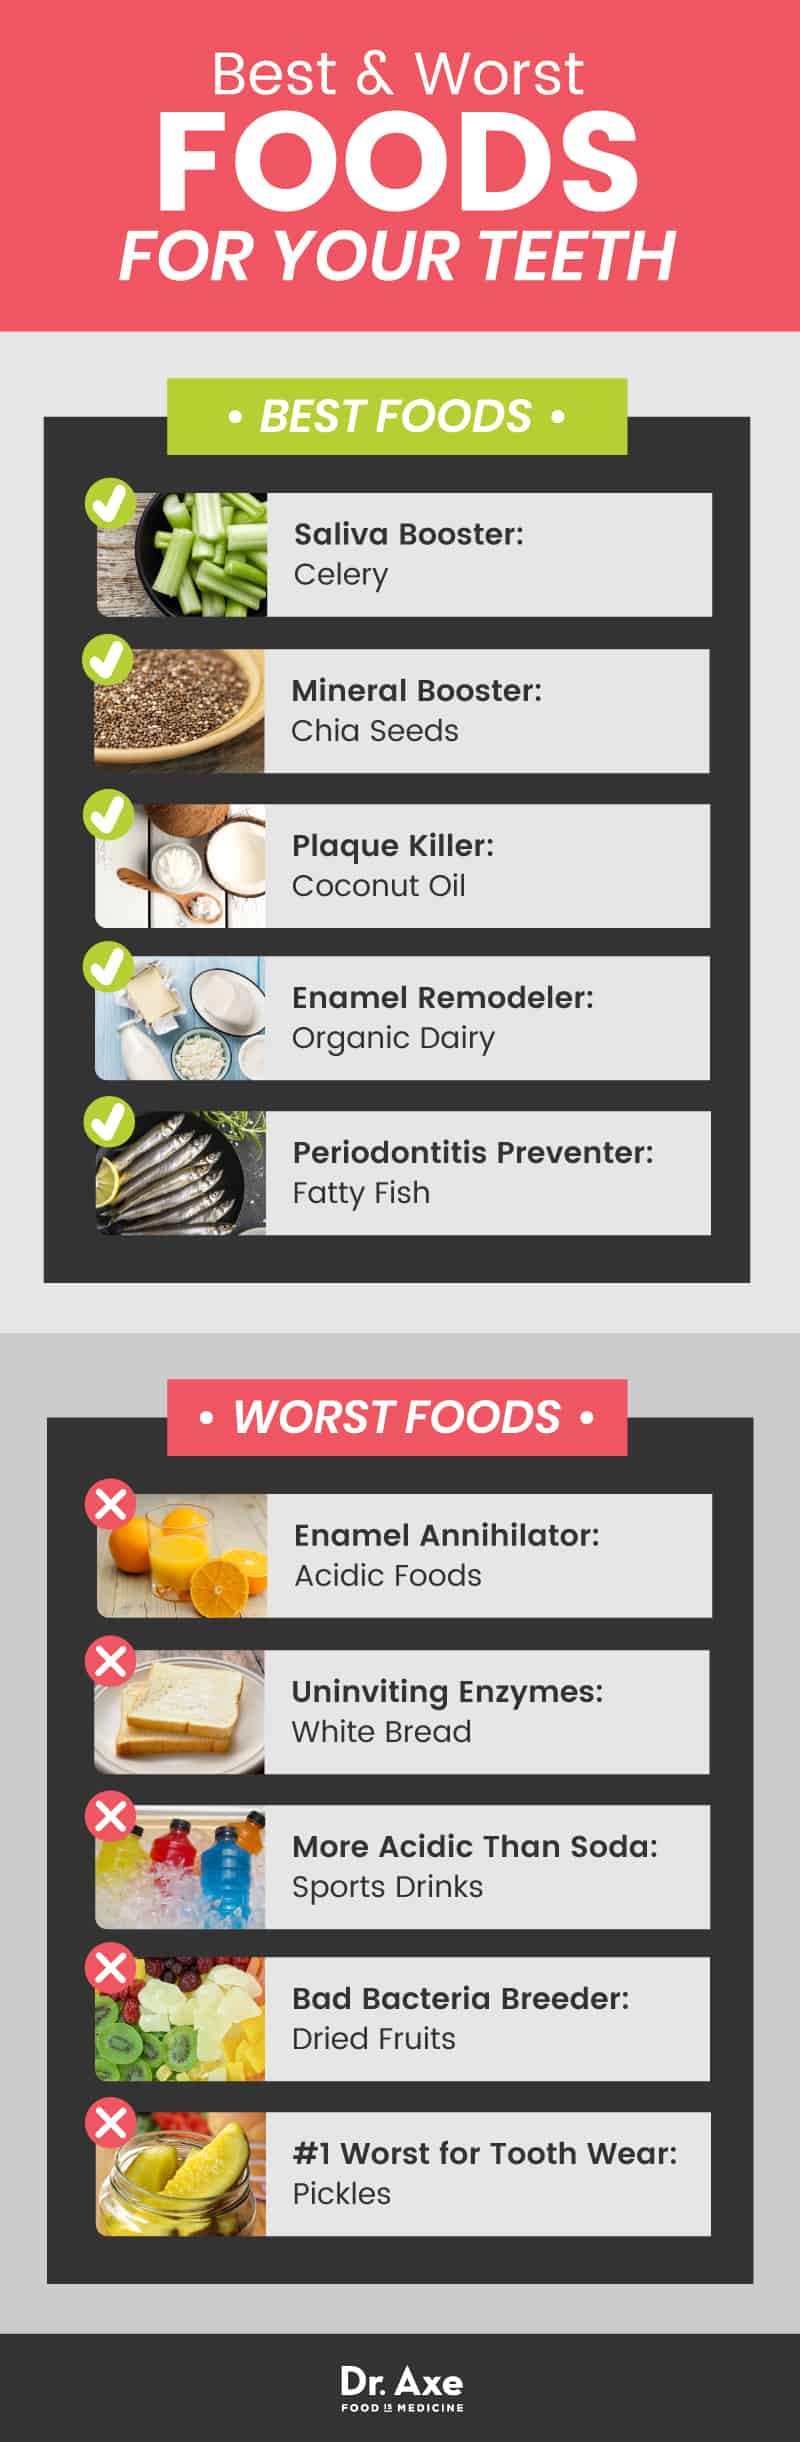 Best and worst foods for your teeth - Dr. Axe